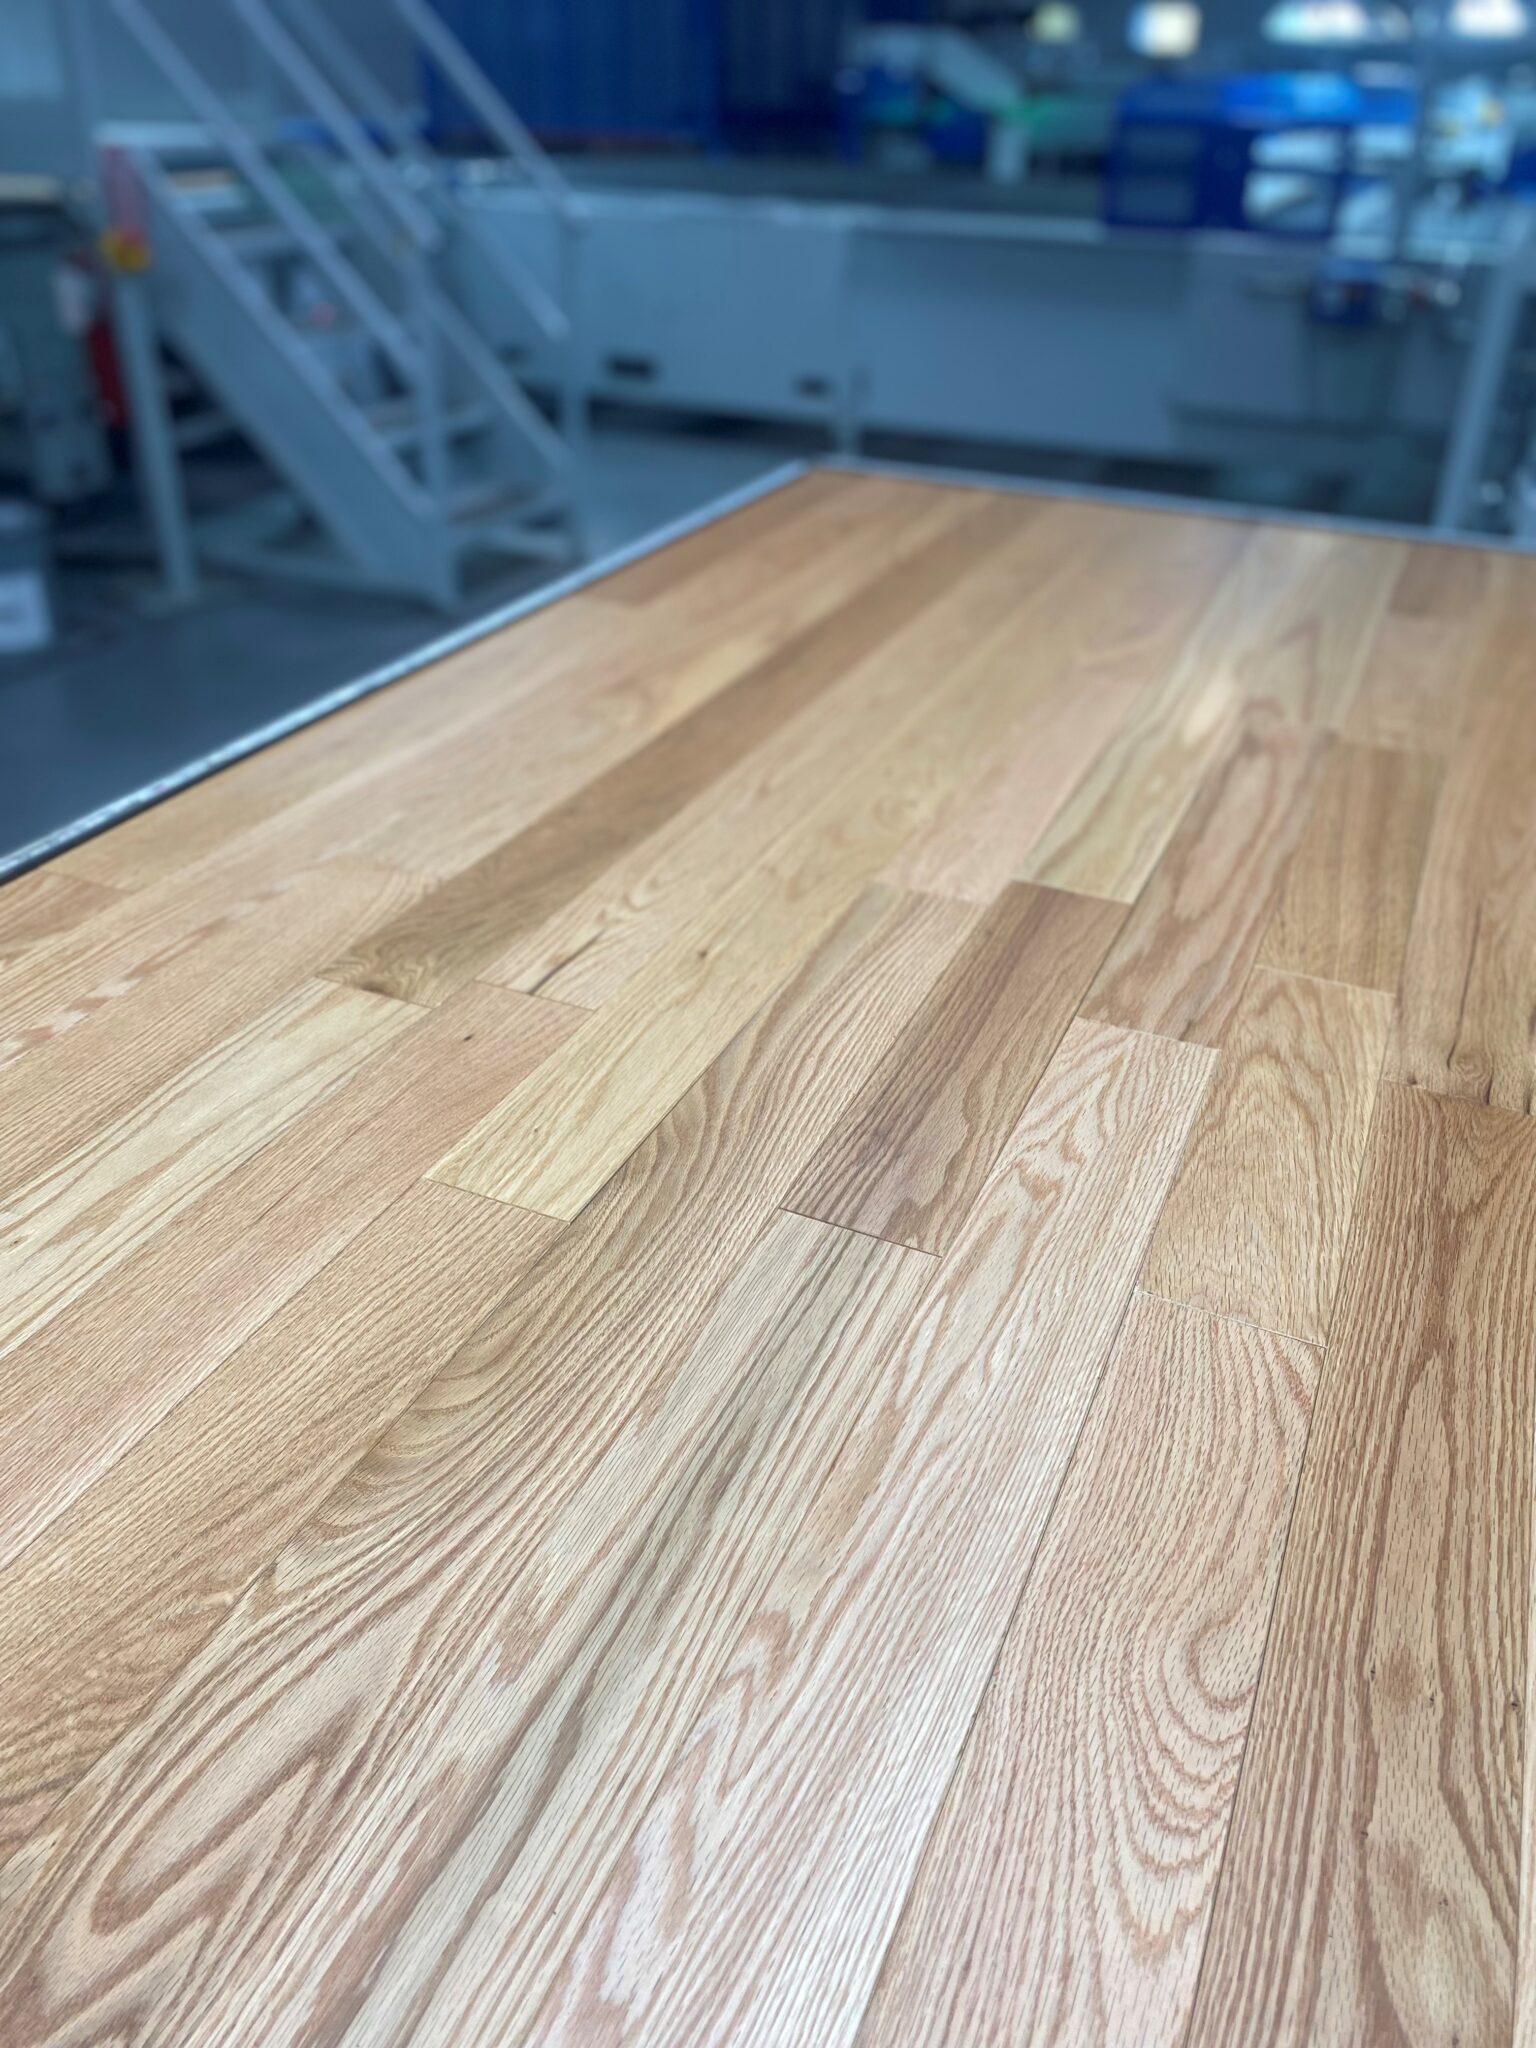 https://mainetraditionsflooring.com/wp-content/uploads/2021/09/207-Red-Oak-Clear-1-scaled.jpg